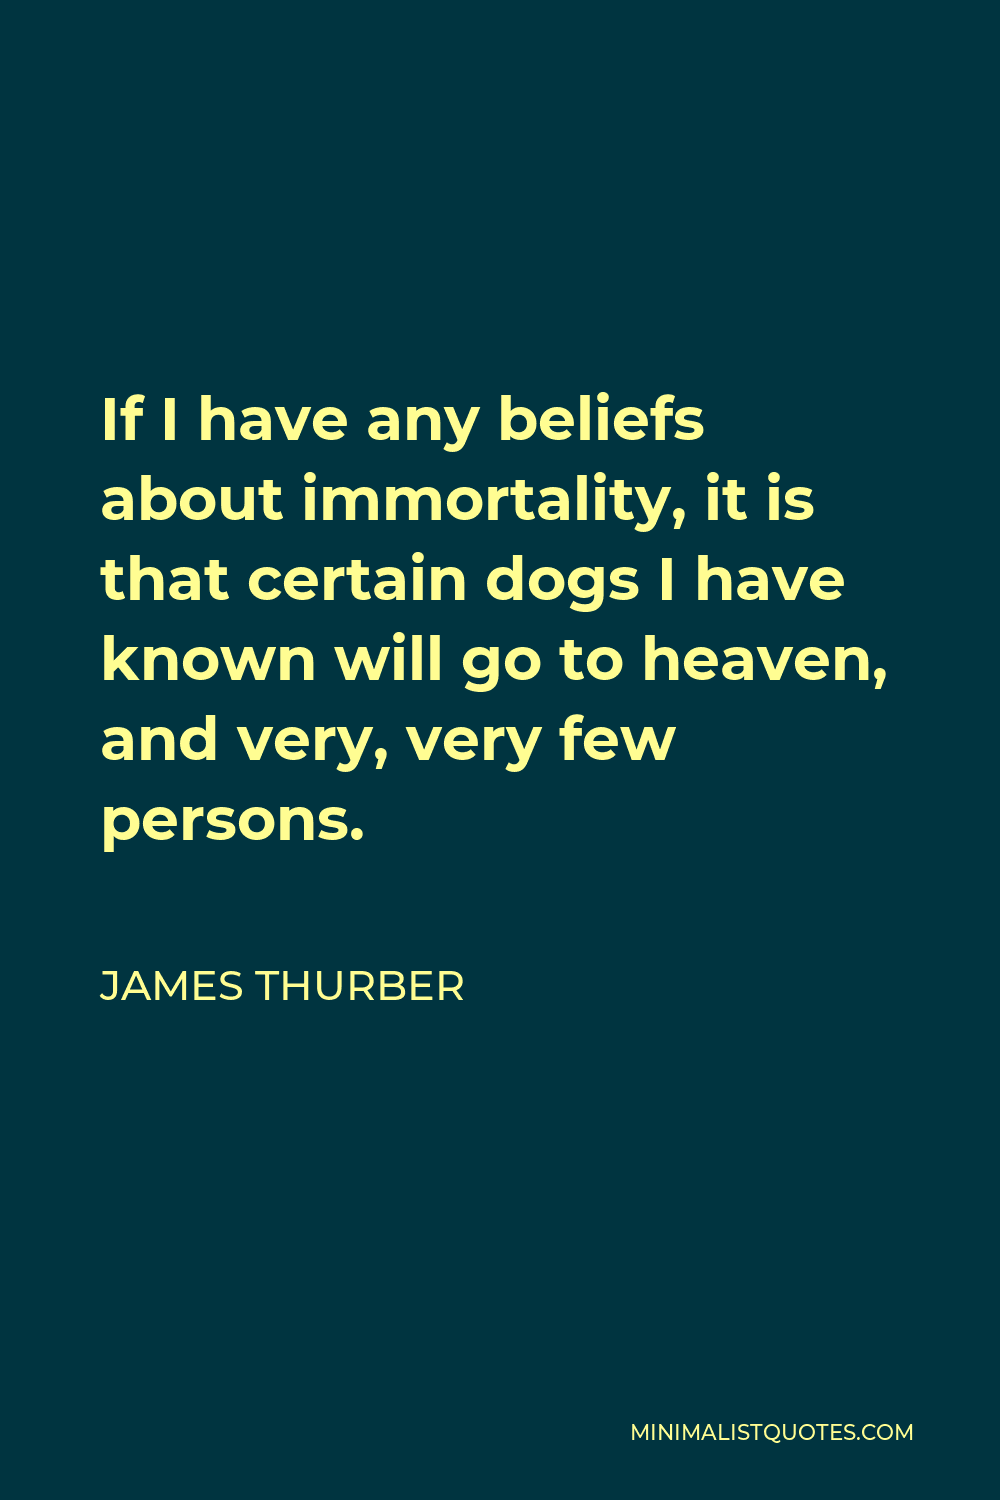 James Thurber Quote - If I have any beliefs about immortality, it is that certain dogs I have known will go to heaven, and very, very few persons.